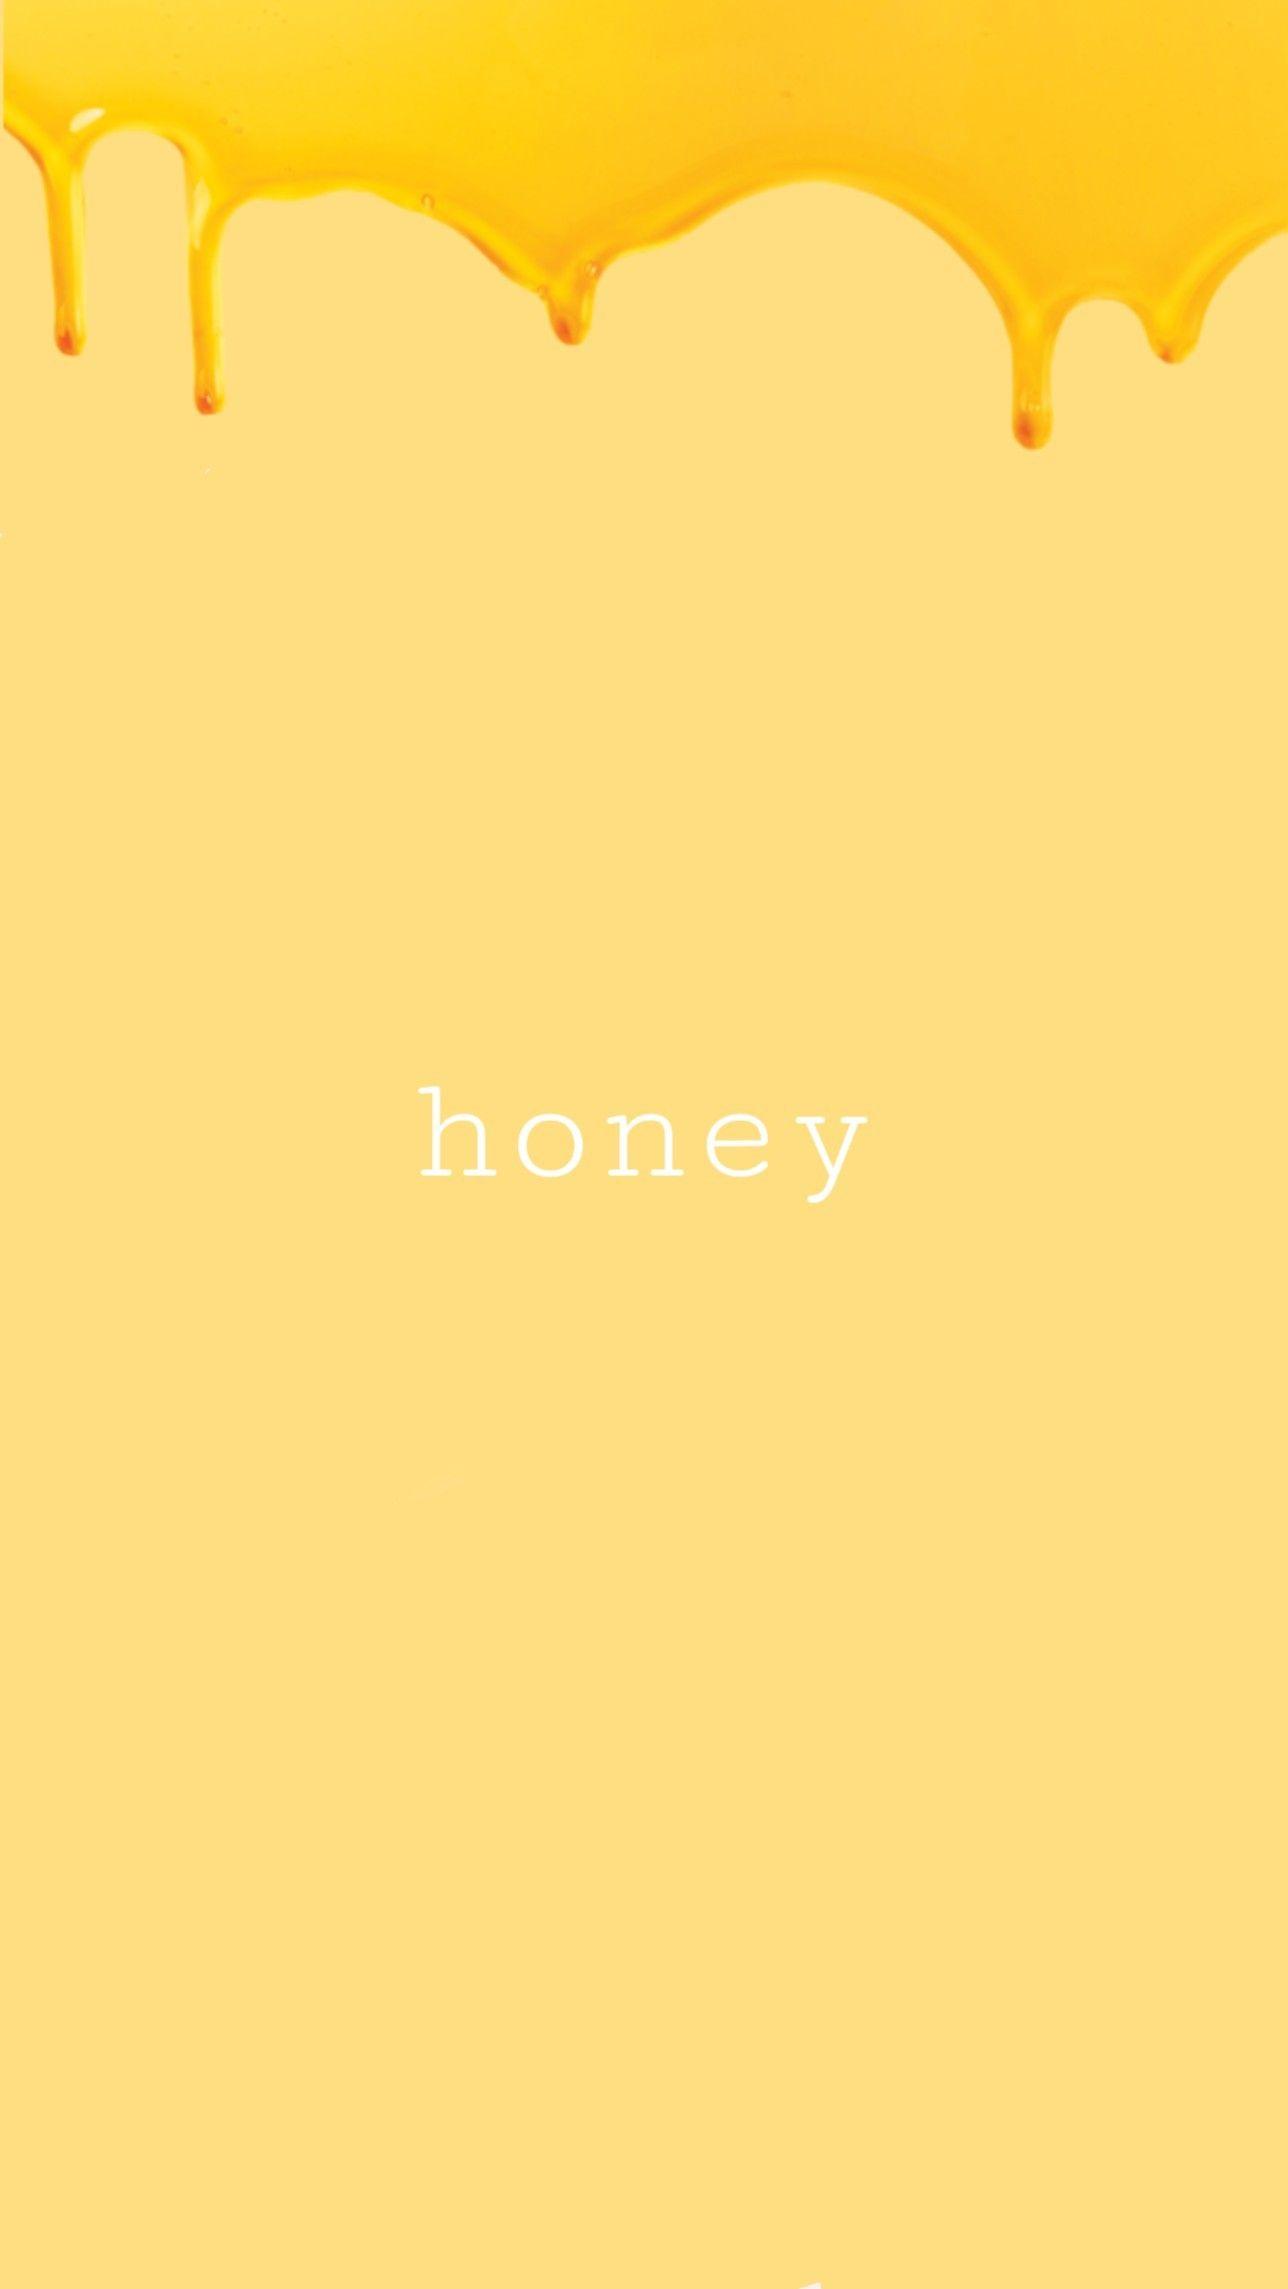 A vertical phone wallpaper with a honey drip design and the word 